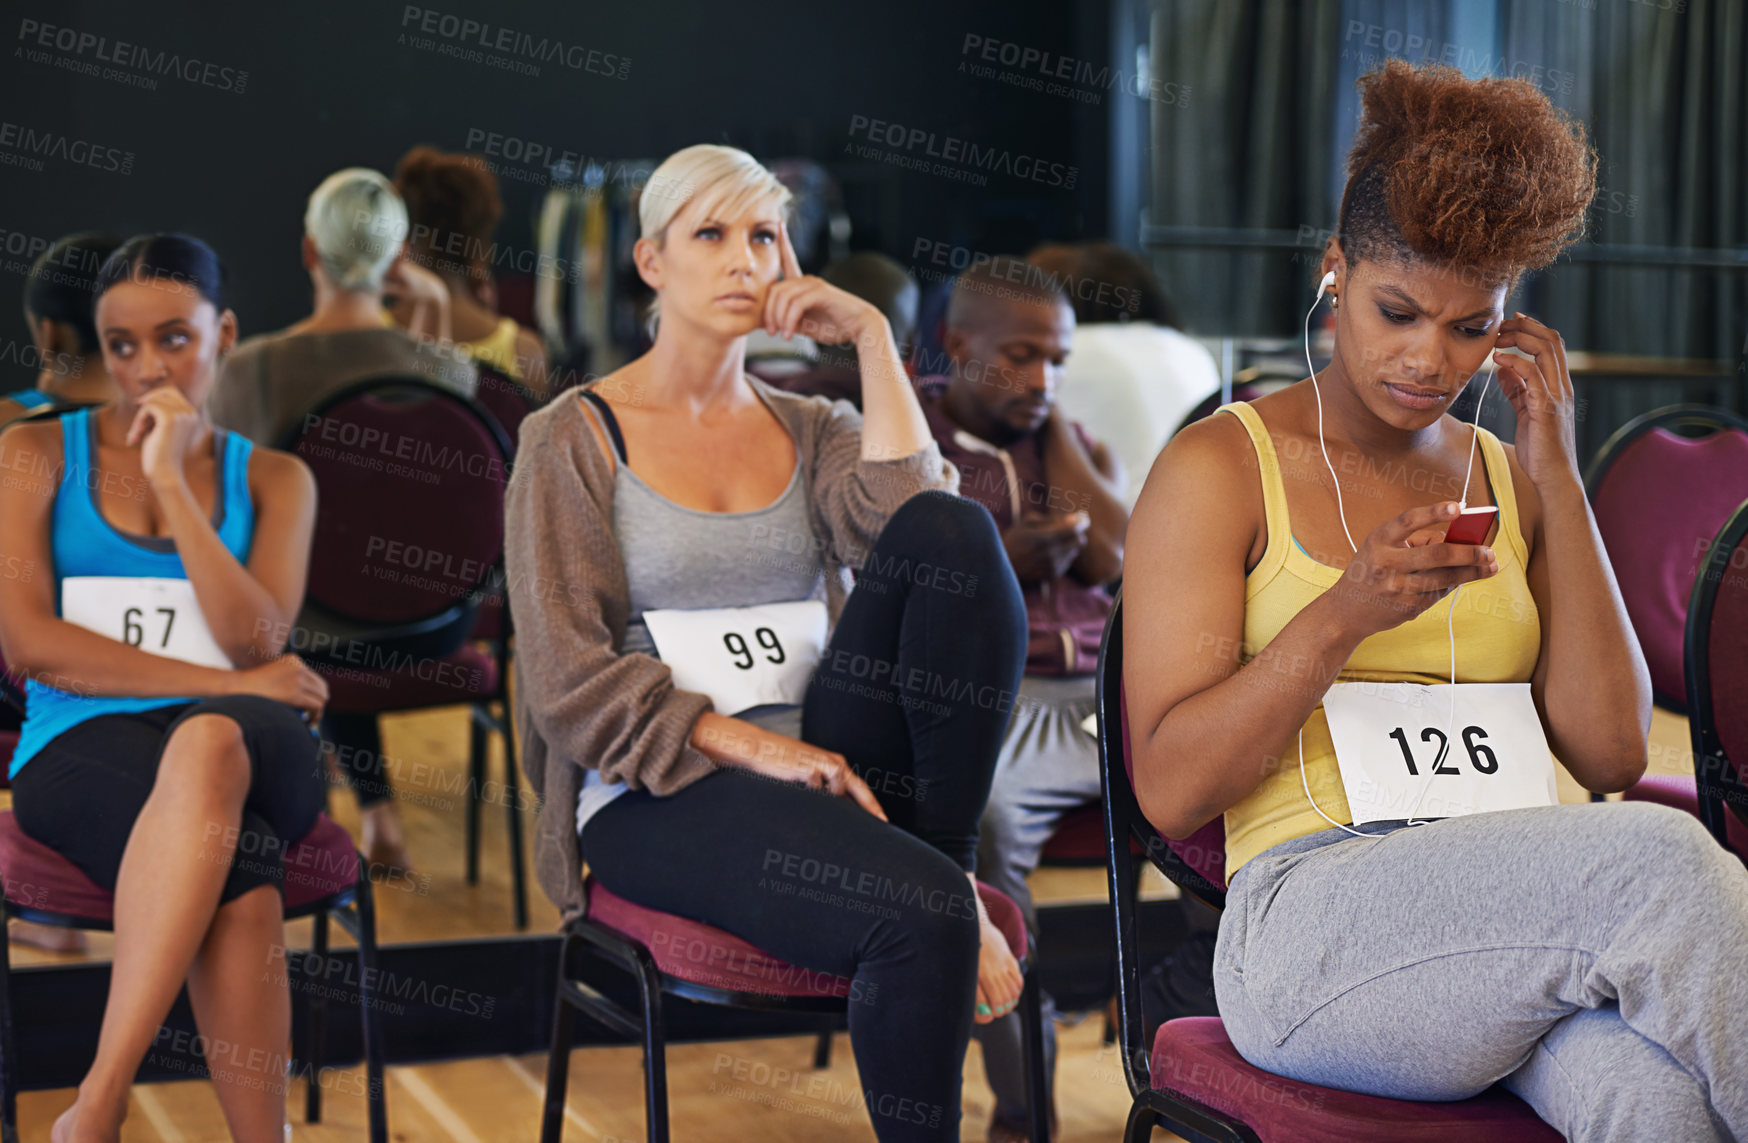 Buy stock photo Shot of a group of young dancers looking anxious while waiting for their dance auditions